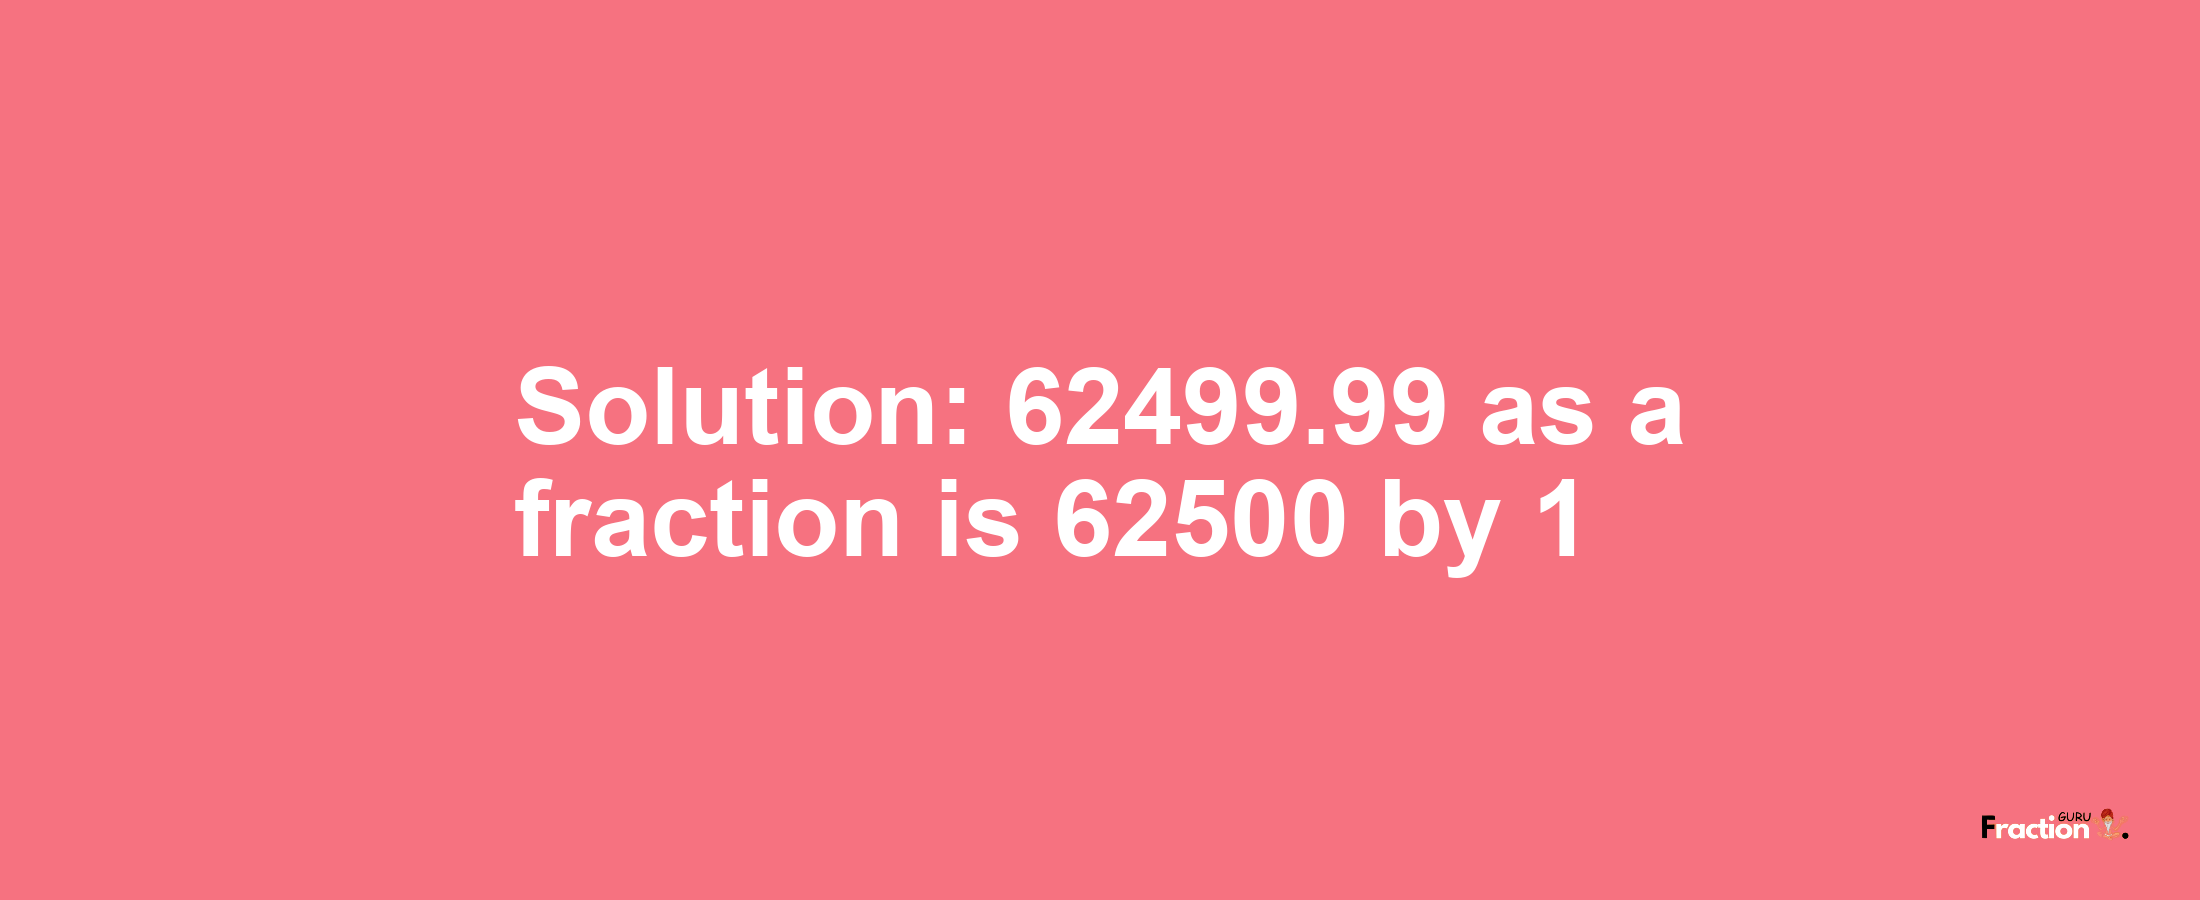 Solution:62499.99 as a fraction is 62500/1